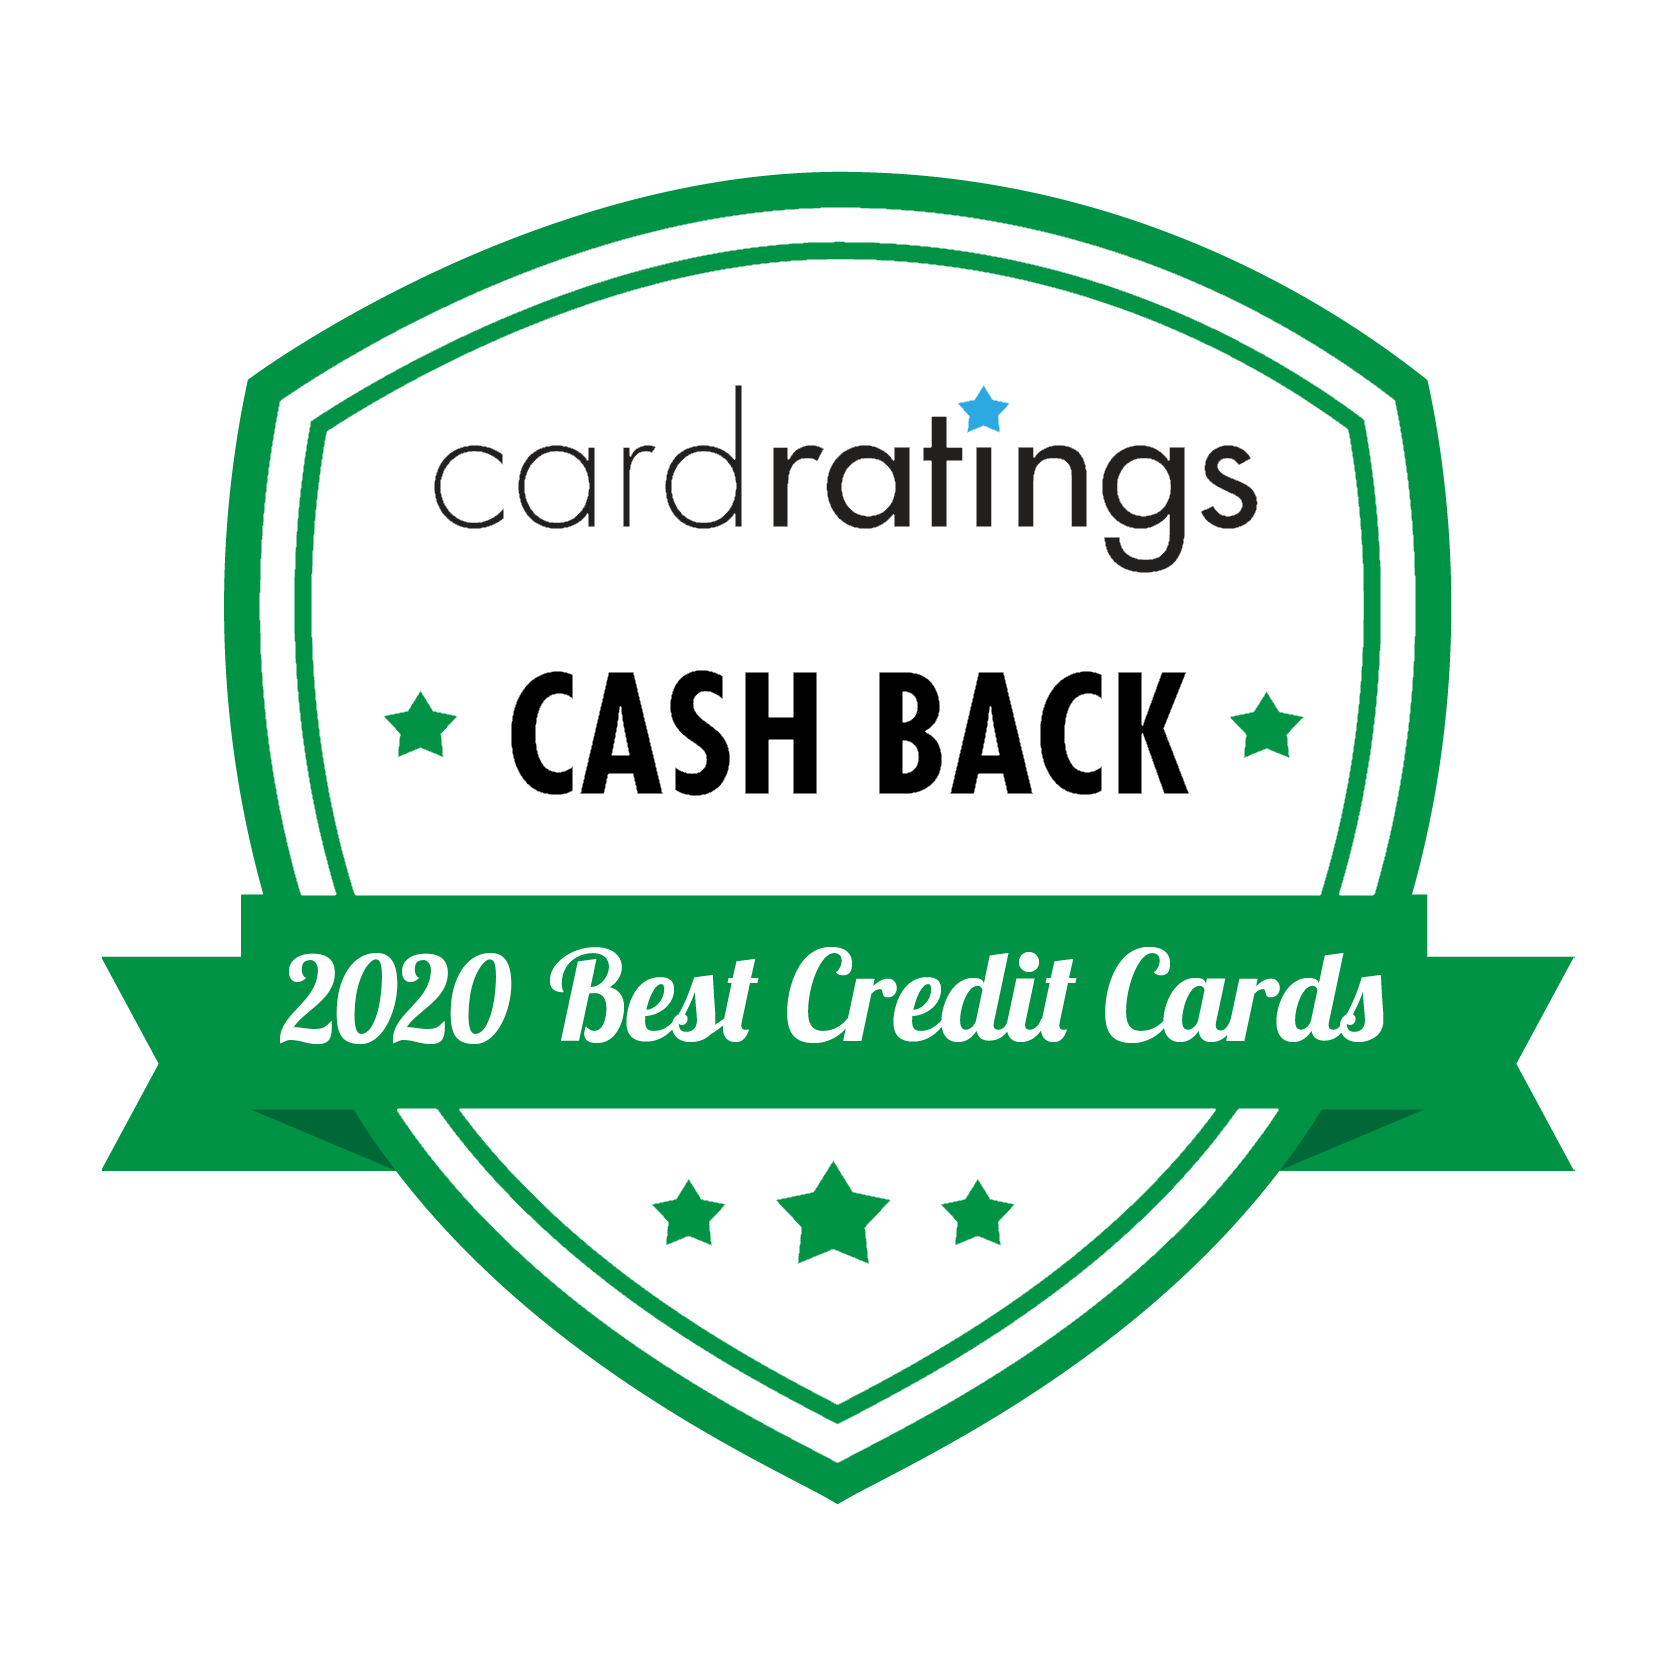 Capital one savor credit card pre approval